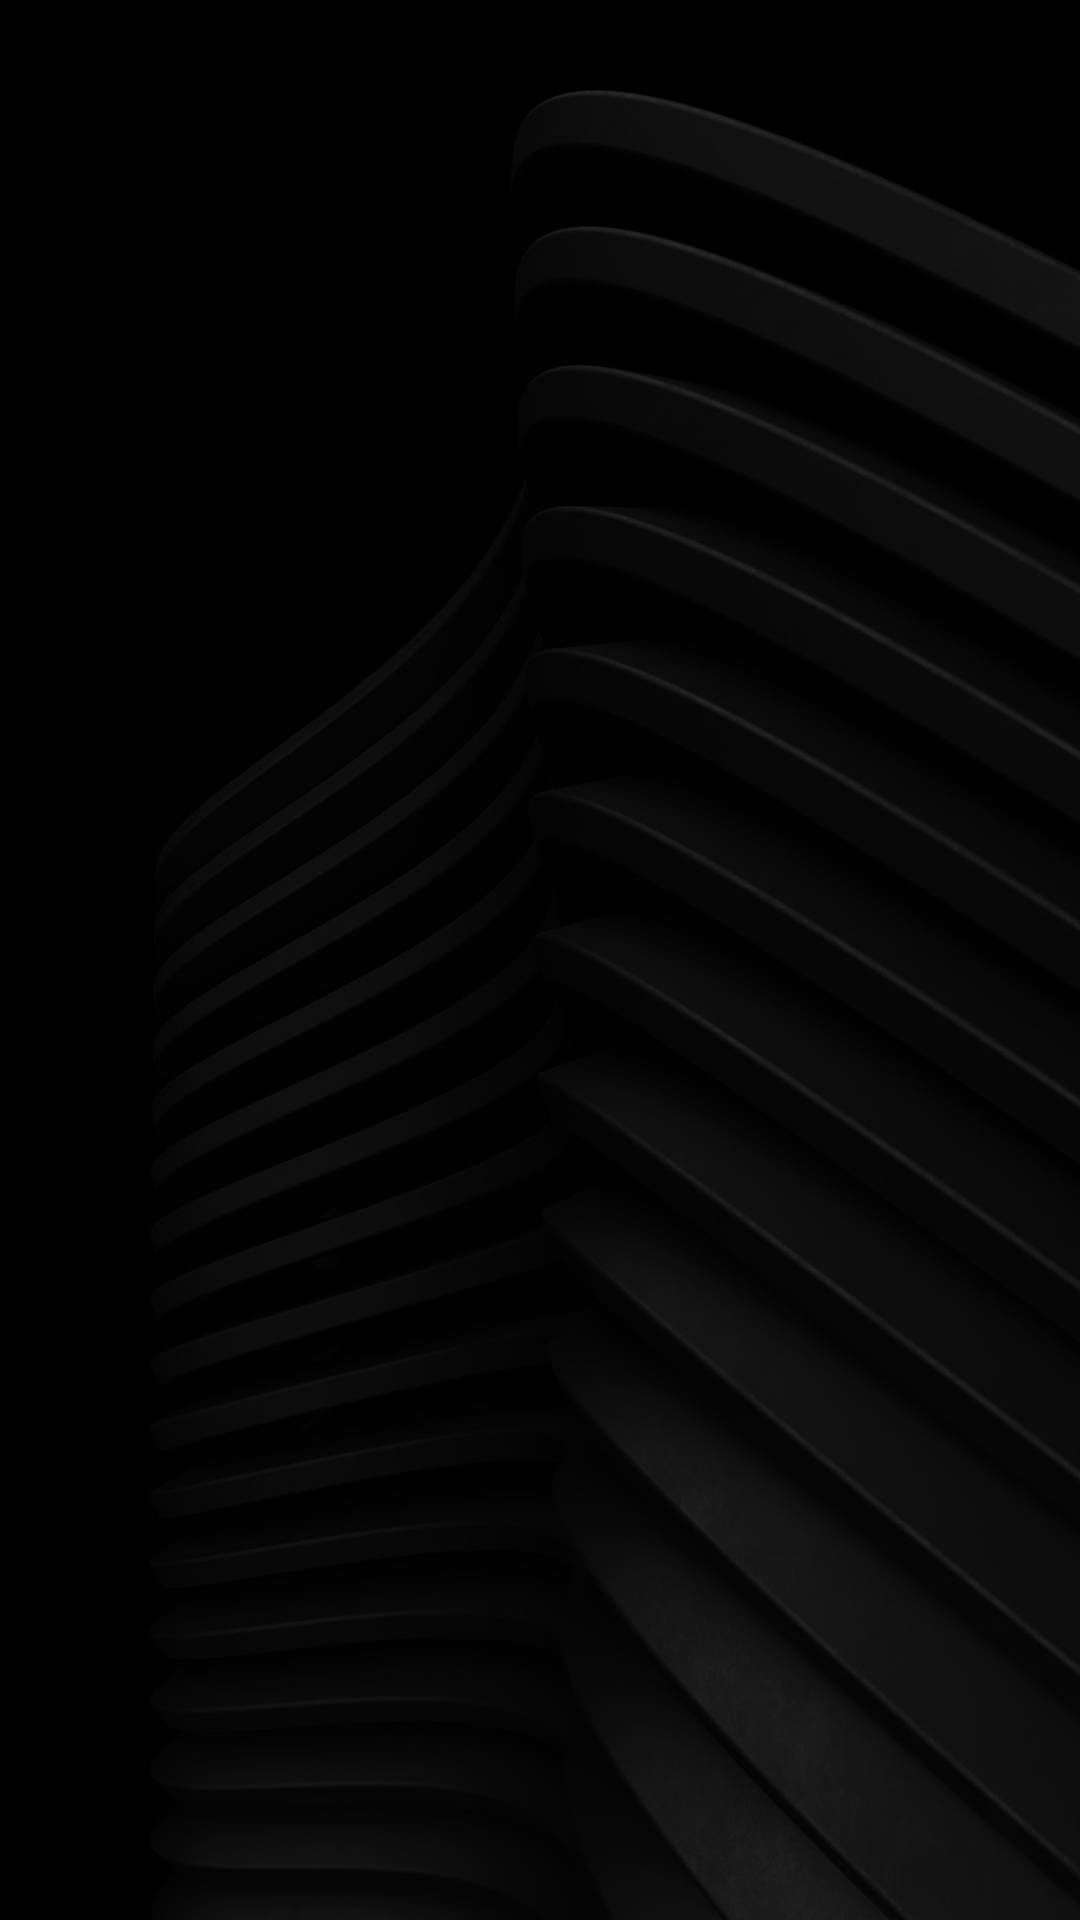 Black Aesthetic Tumblr Iphone Curved Abstract Background